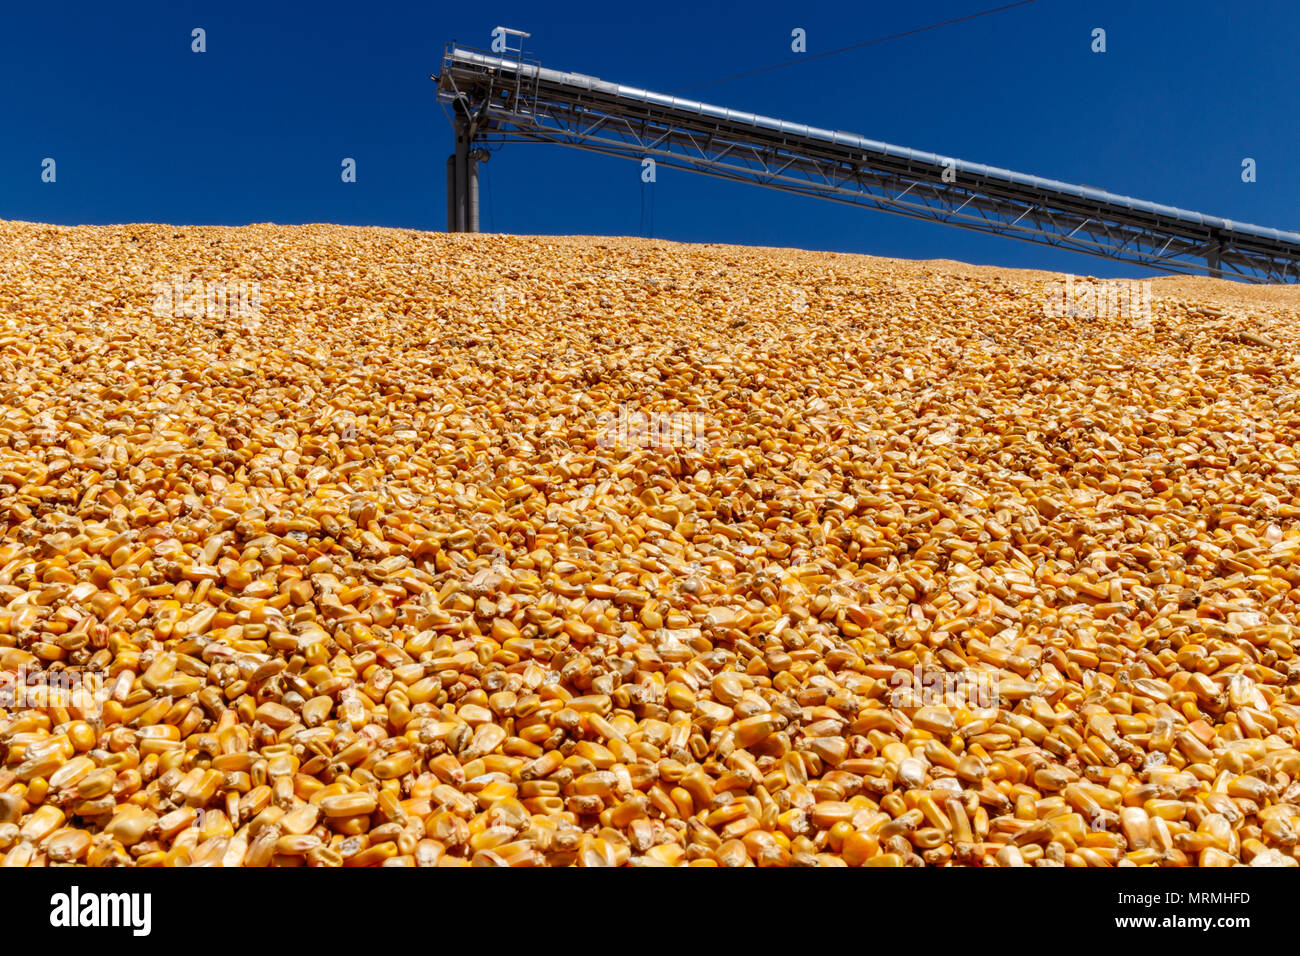 Corn and Grain Handling or Harvesting Terminal. Corn Can be Used for Food, Feed or Ethanol IV Stock Photo